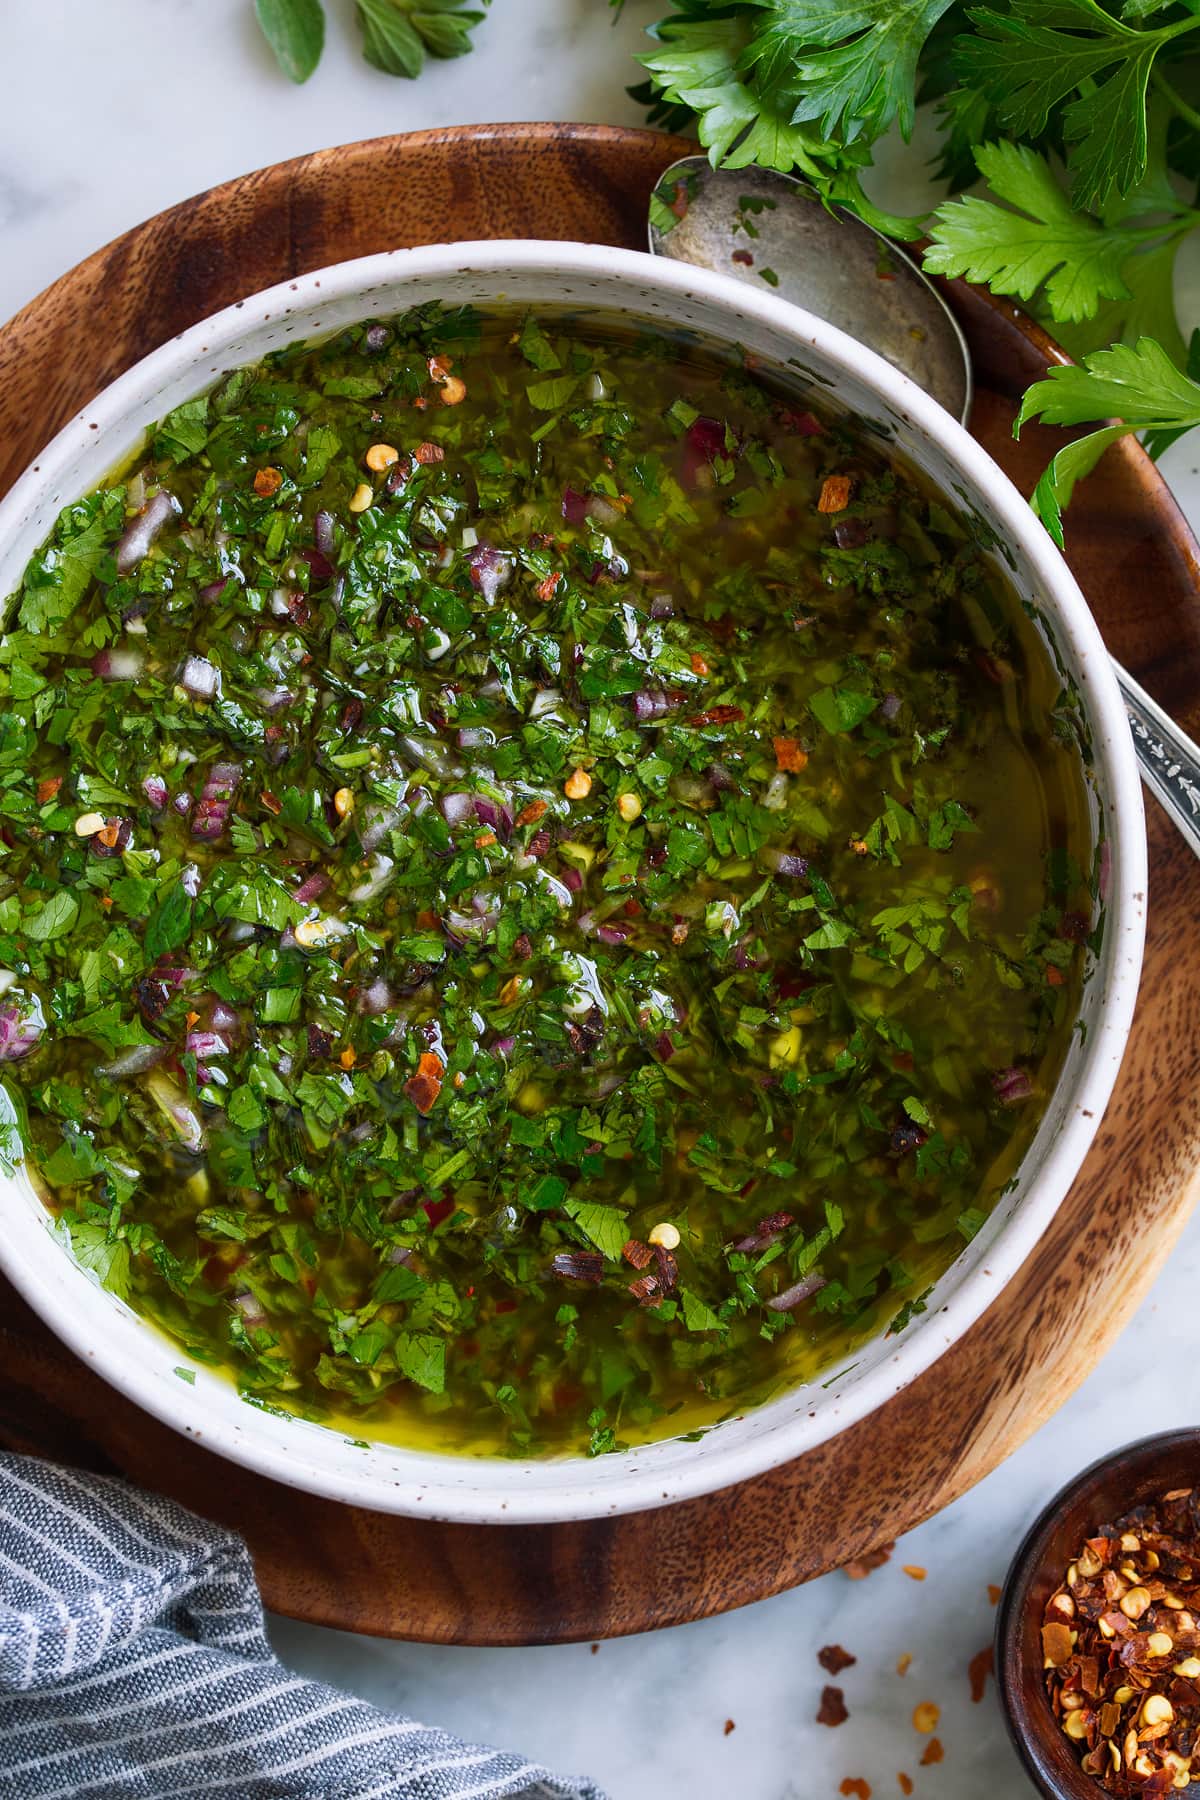 Chimichurri Sauce Recipe {Most Flavorful!} - Cooking Classy